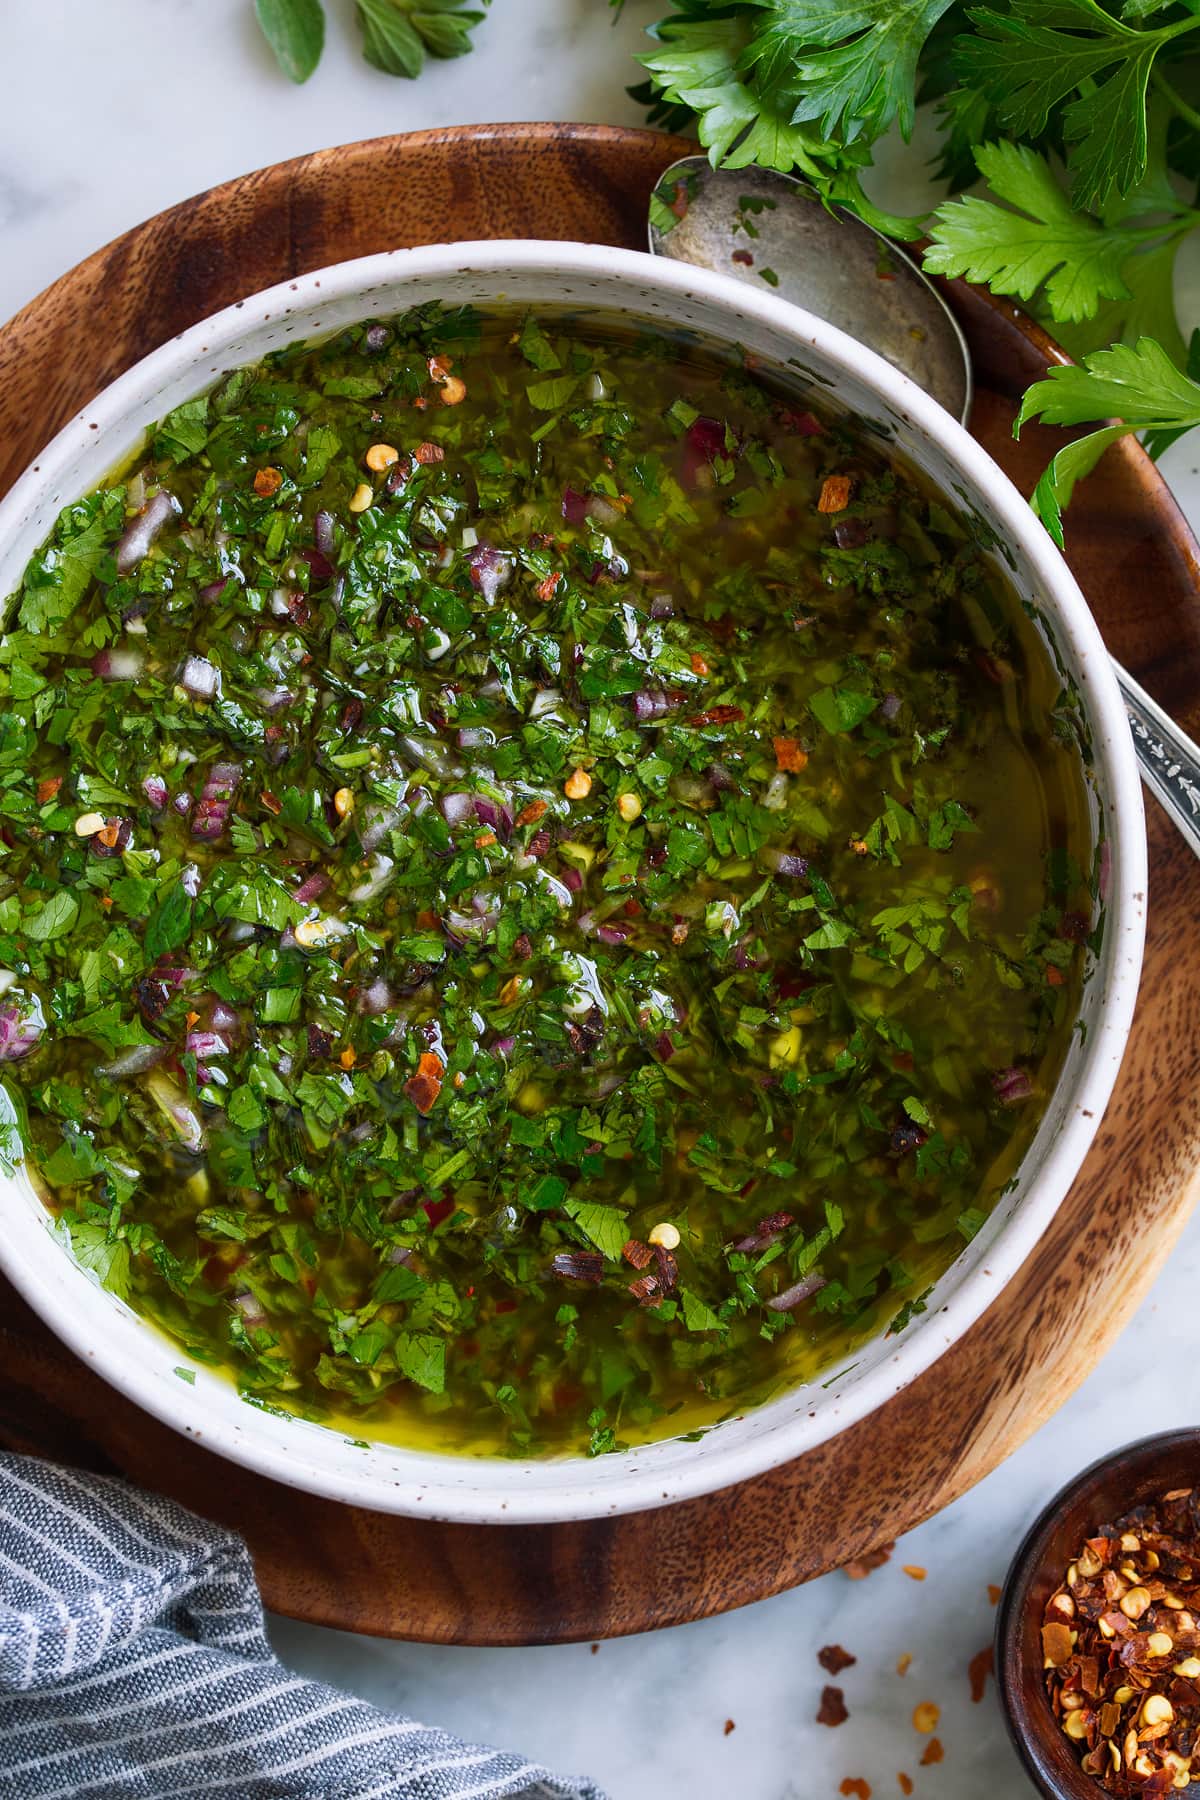 Chimichurri Sauce Recipe {Most Flavorful!} - Cooking Classy